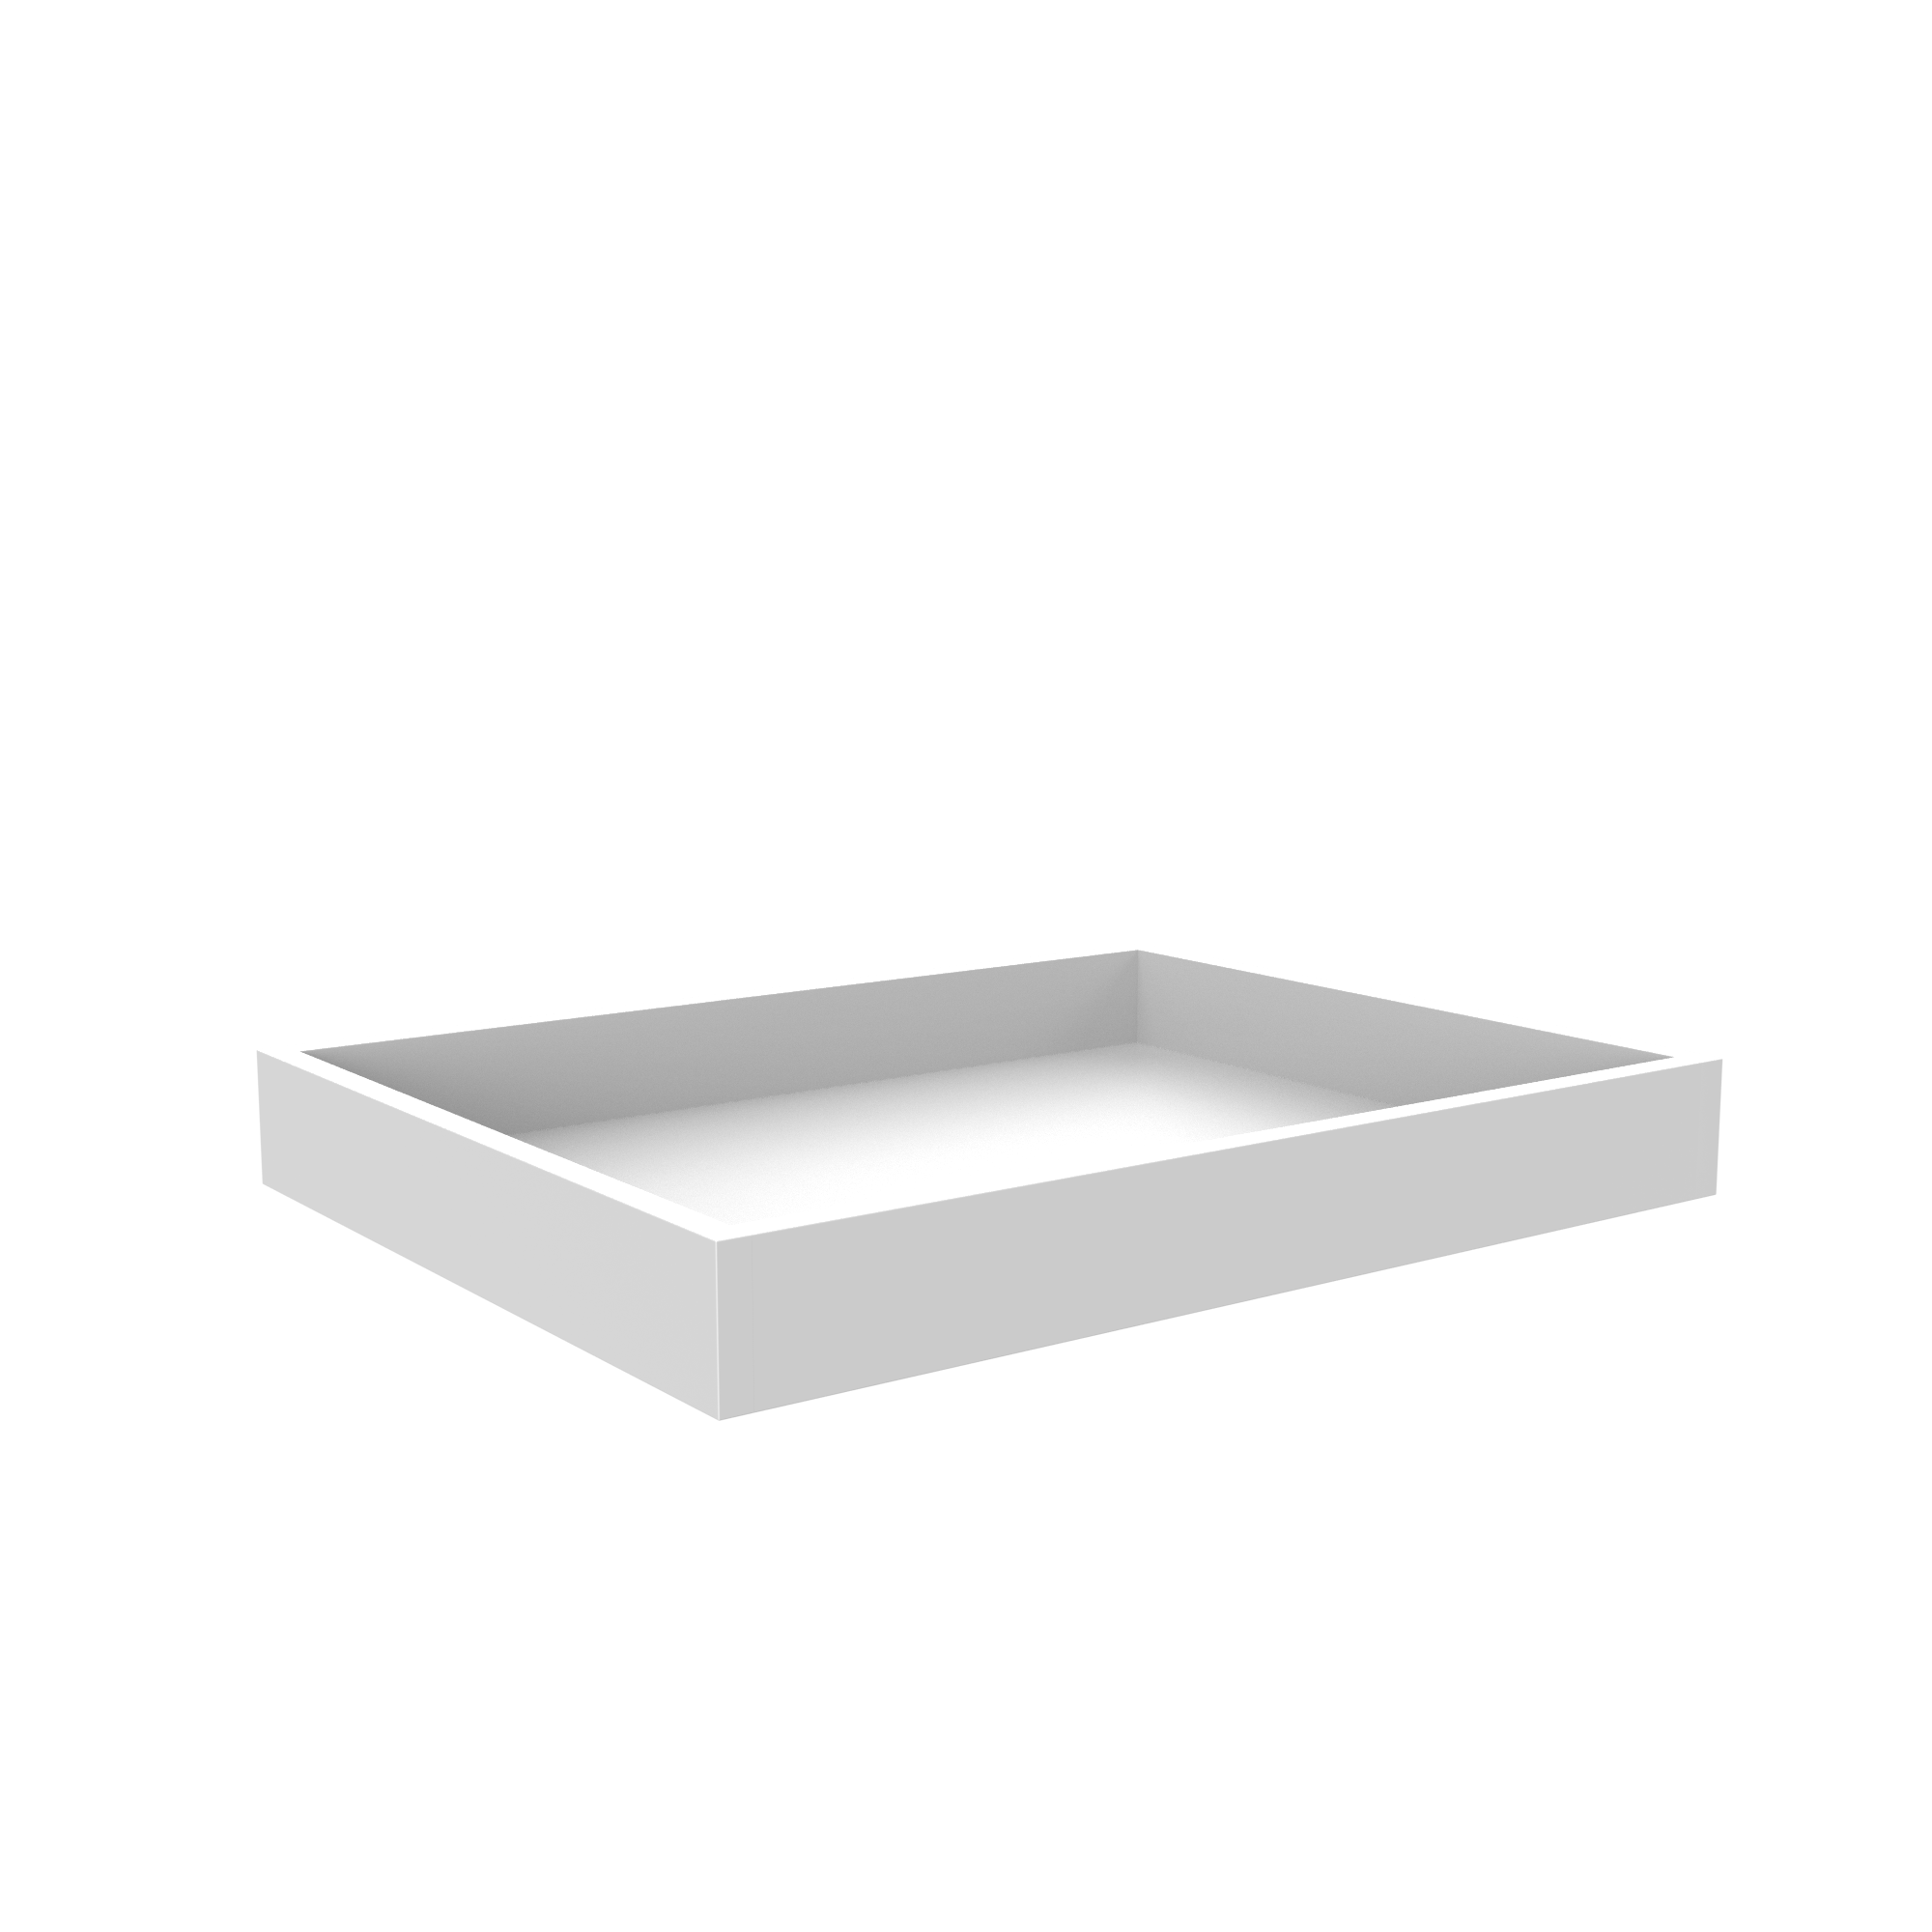 Roll Out Tray for Cabinets - Fits B27 - Aria White Shaker Cabinet